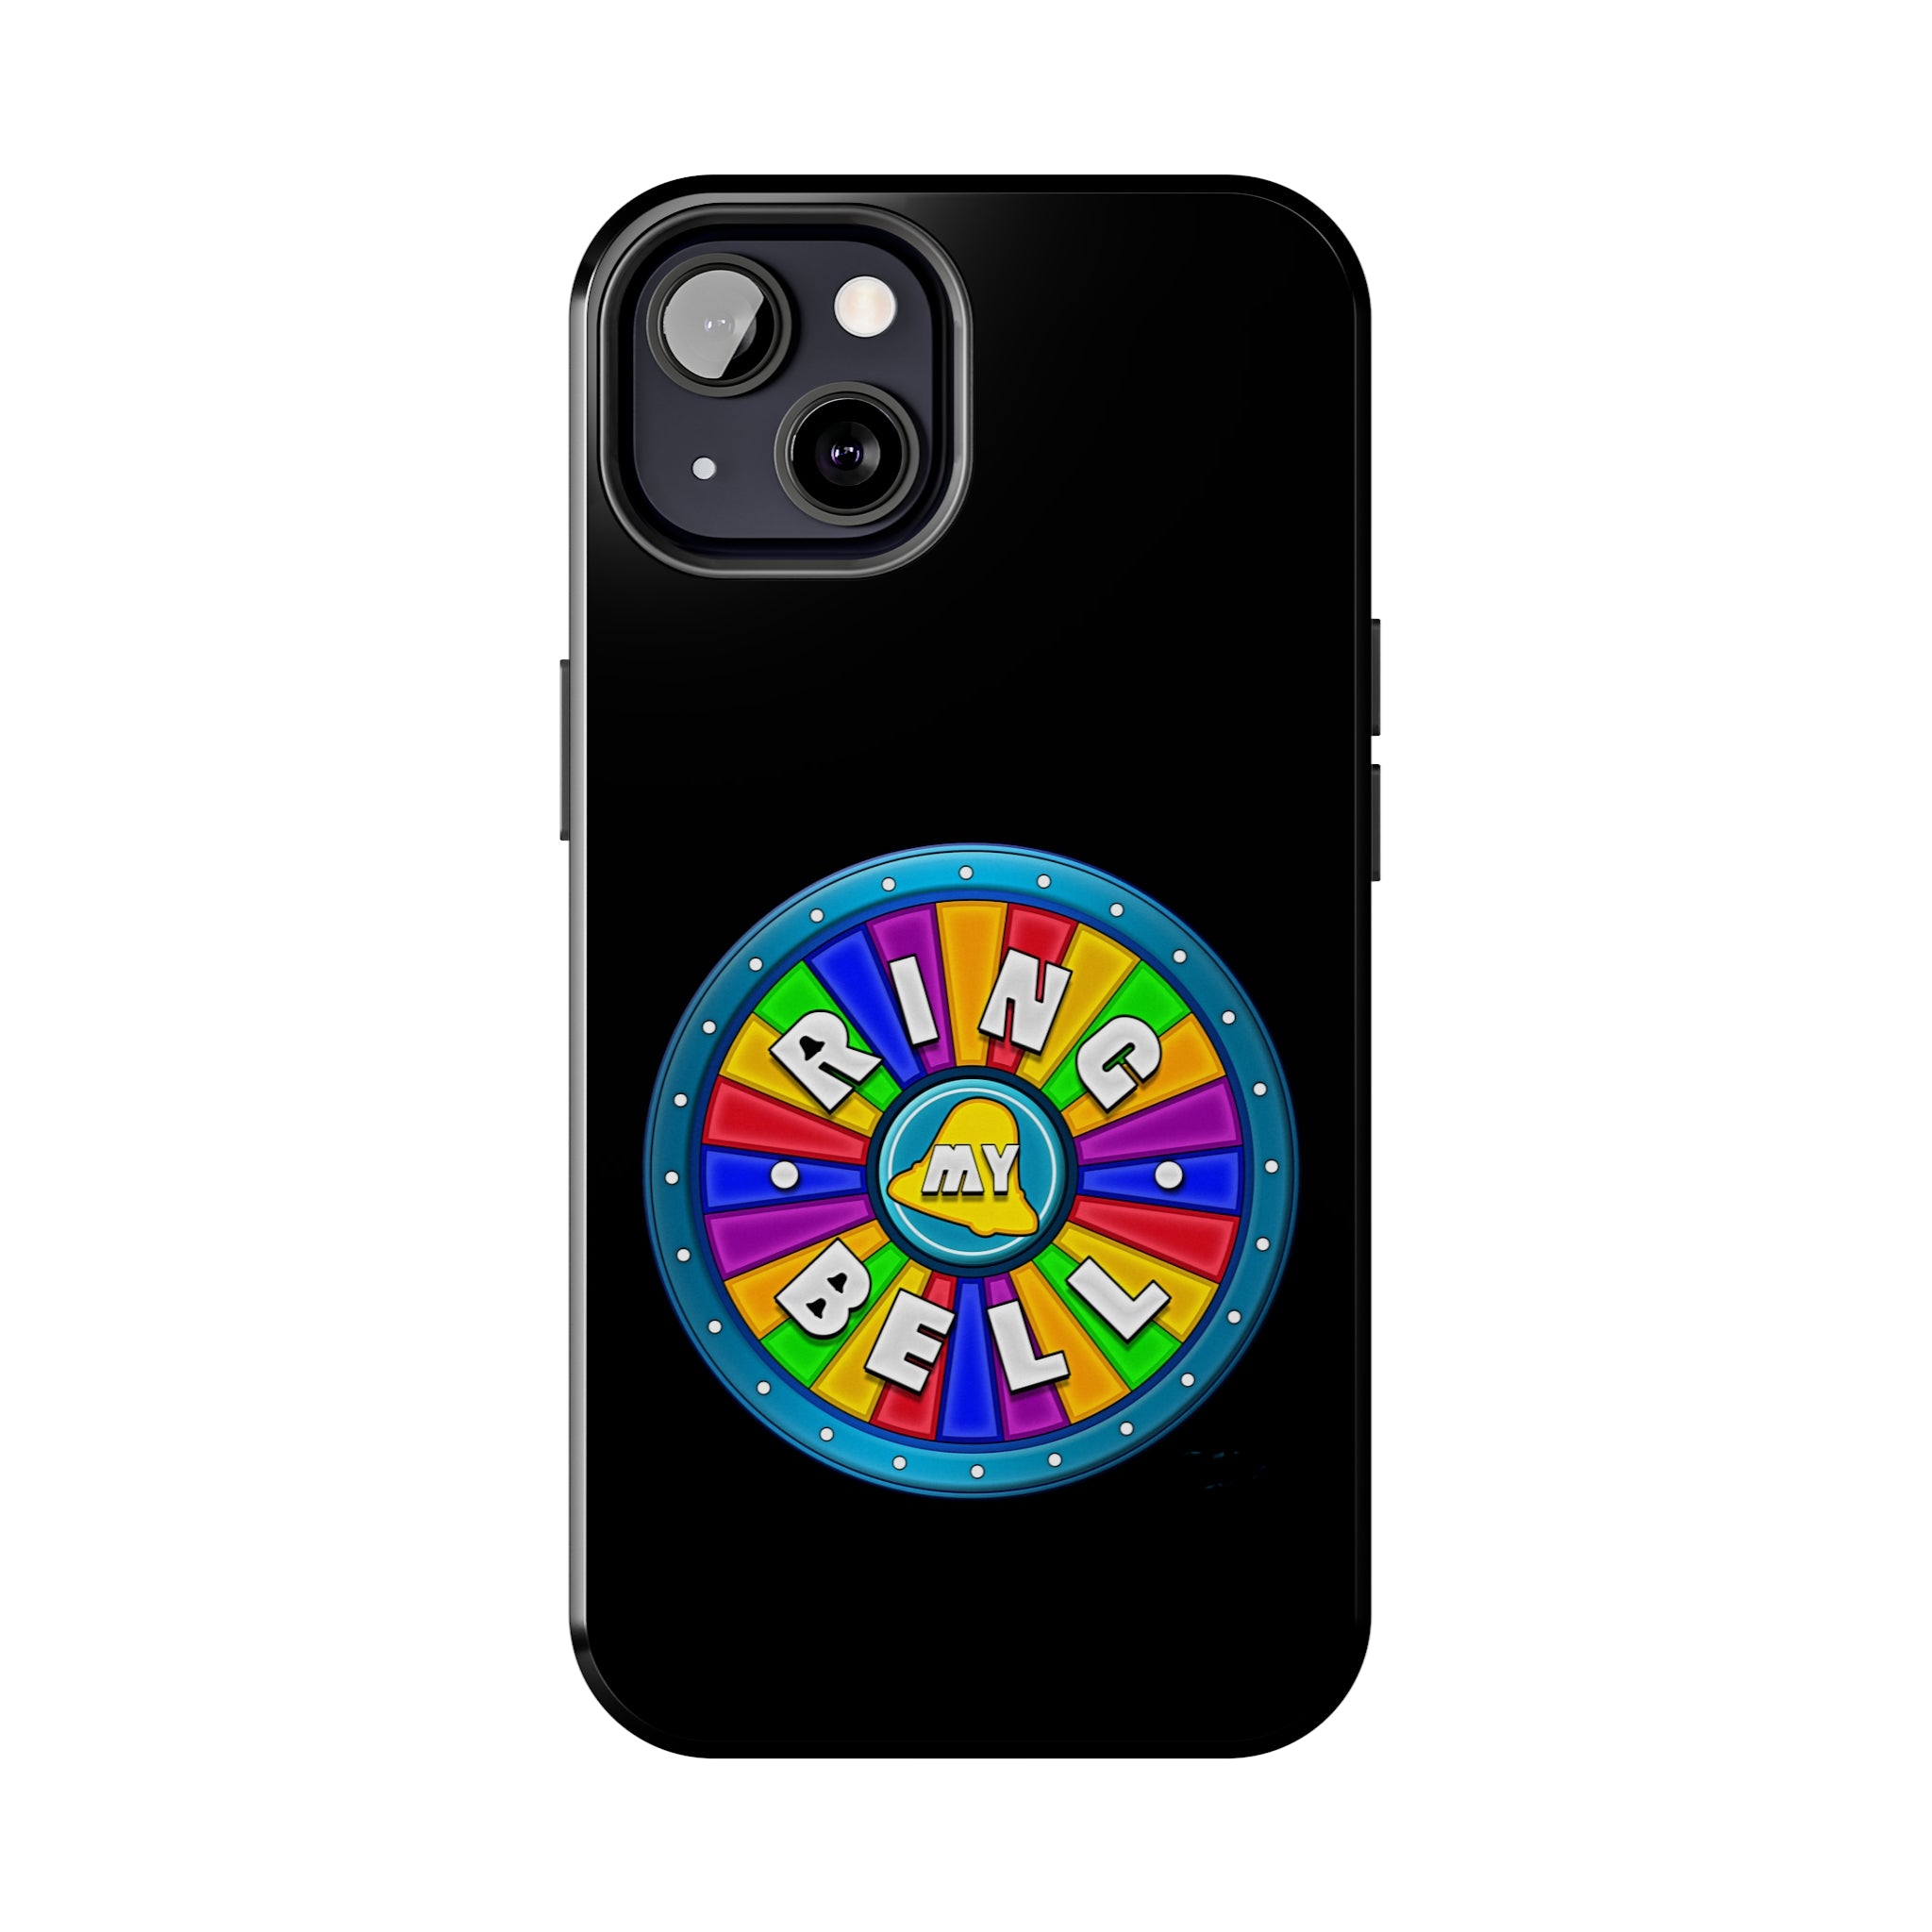 RING MY BELL Tough Phone Cases